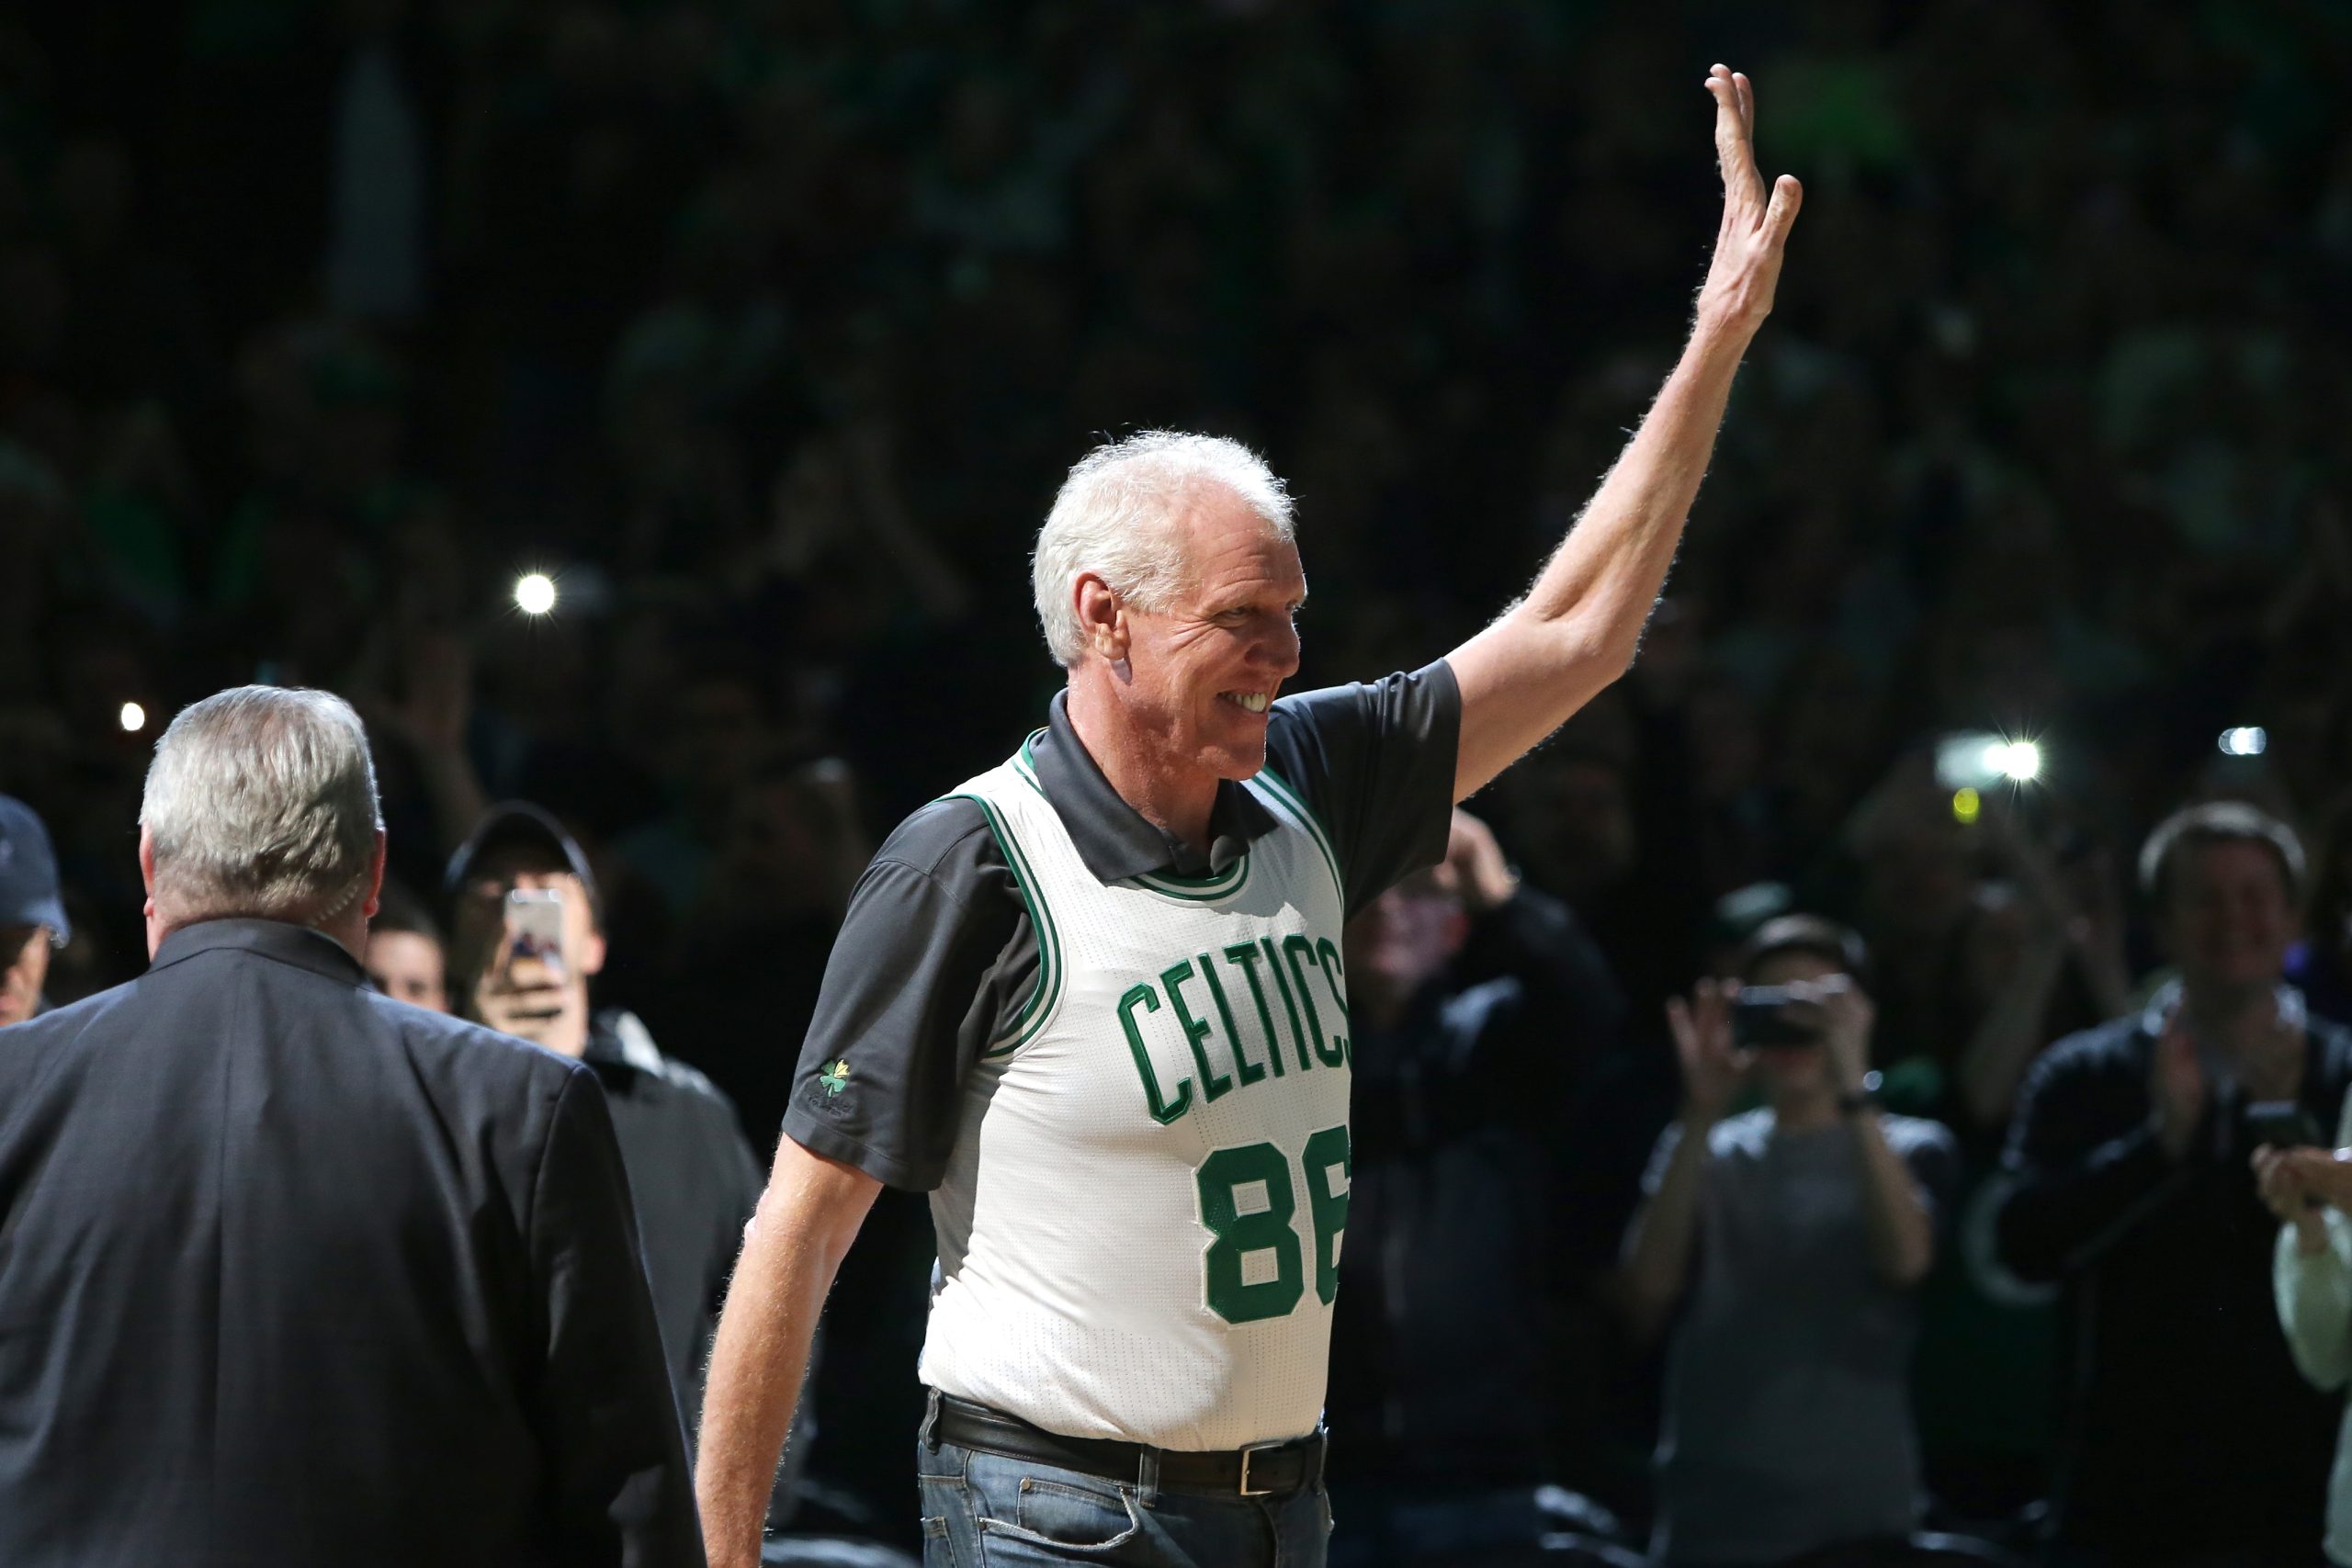 Bill Walton is honored at halftime of the game between the Boston Celtics and Miami Heat at TD Garden on April 13, 2016 in Boston, Massachusetts.